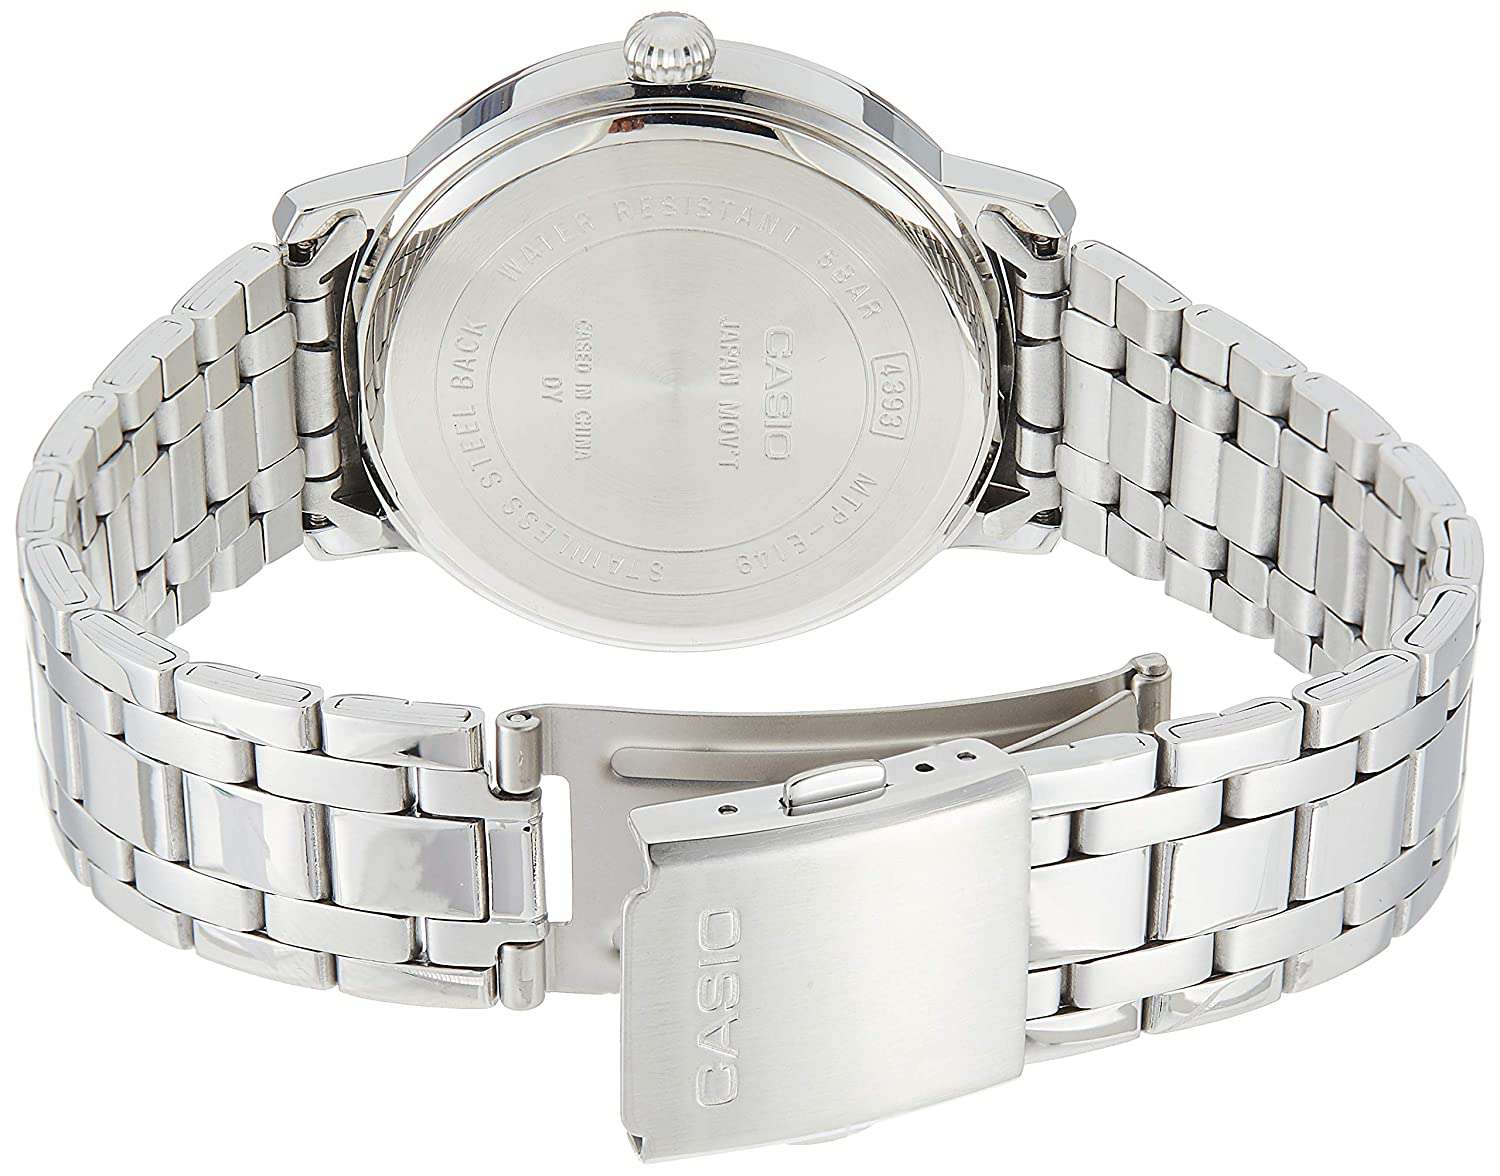 Casio MTP-E149D-7B Silver Stainless Watch for Men-Watch Portal Philippines